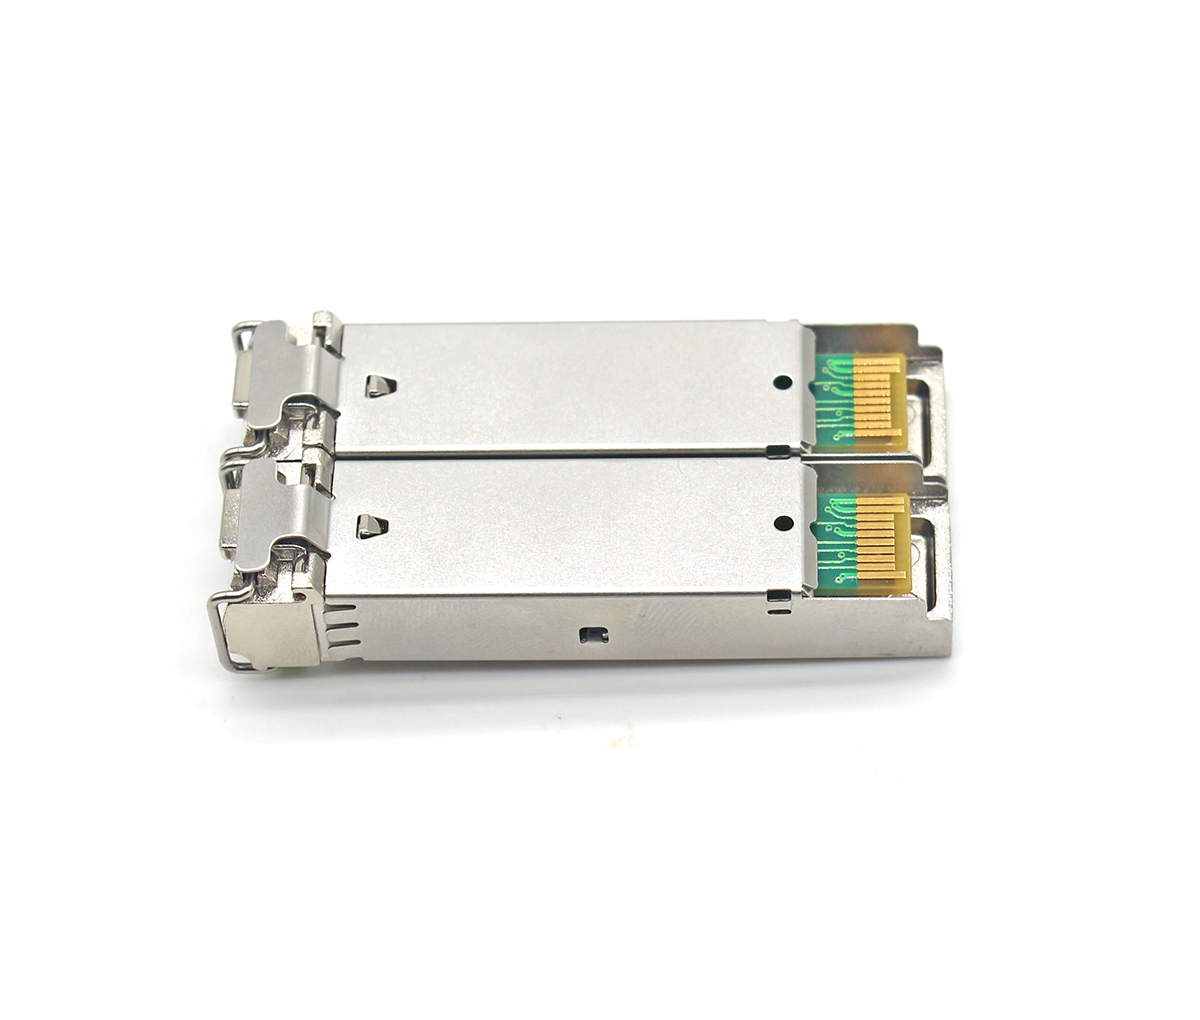 The overall solution of 10G SFP+ optical module